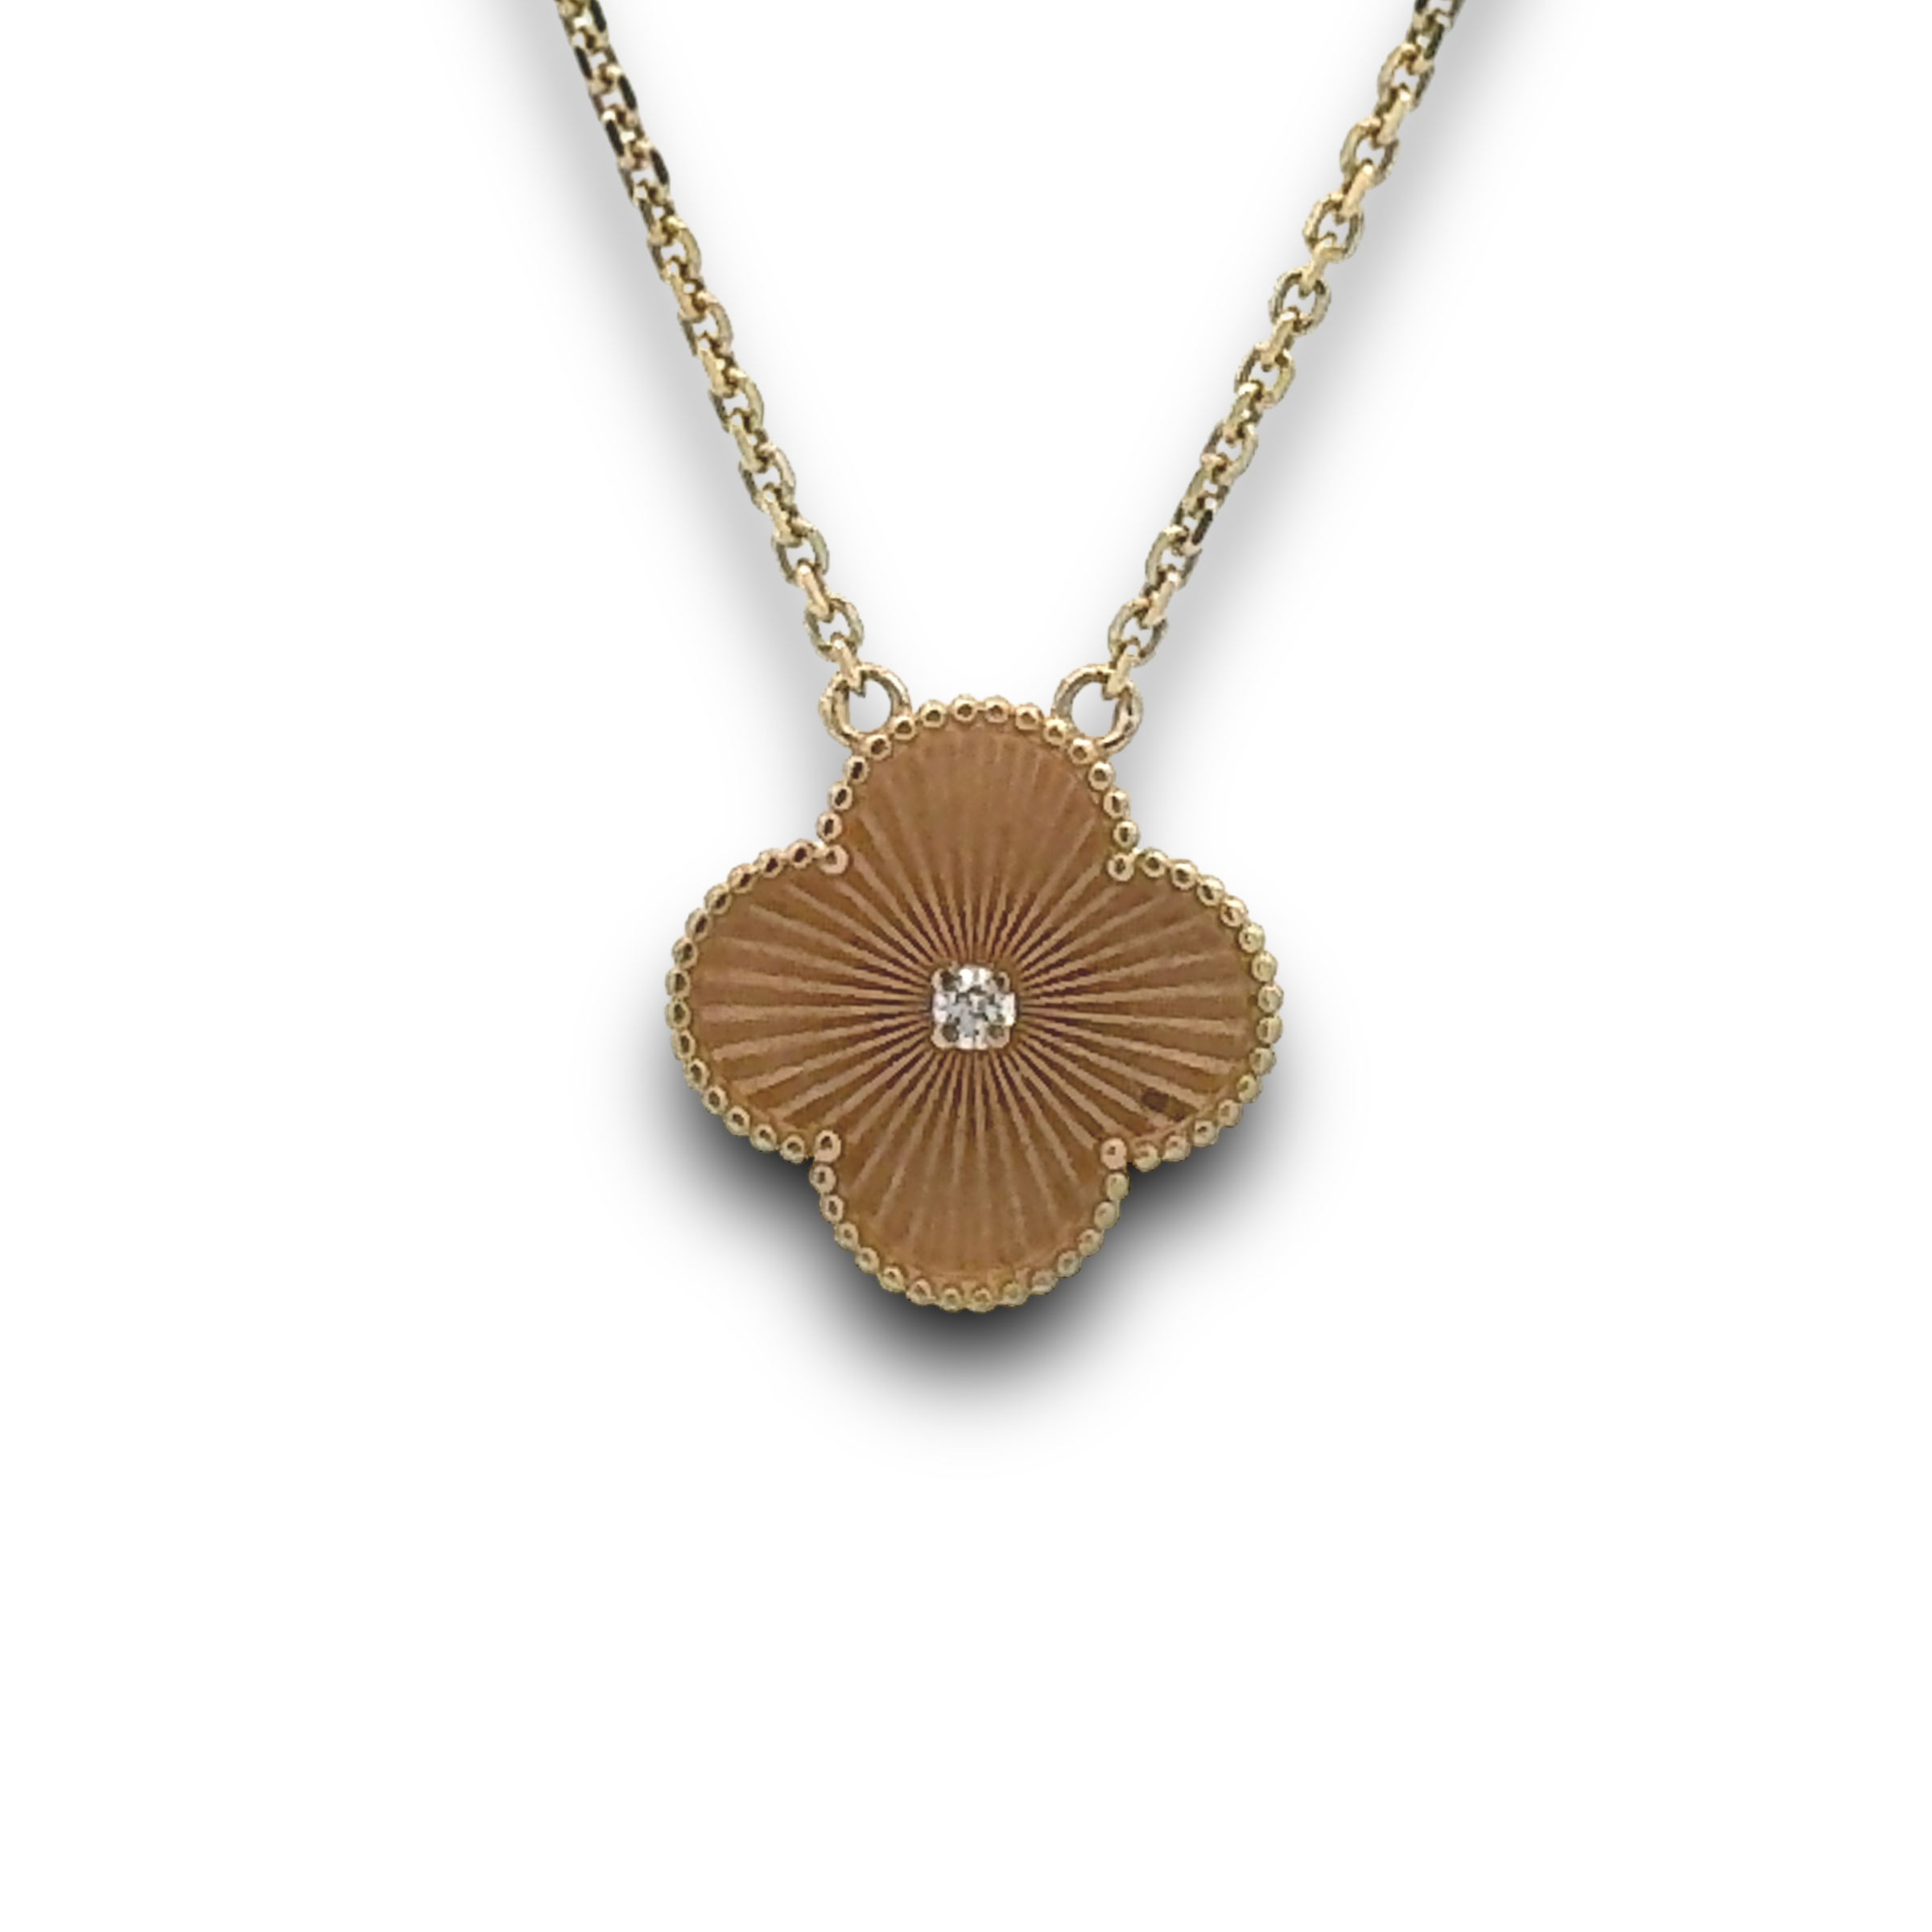 Marcella Diamond Accent Necklace in 14k Yellow Gold